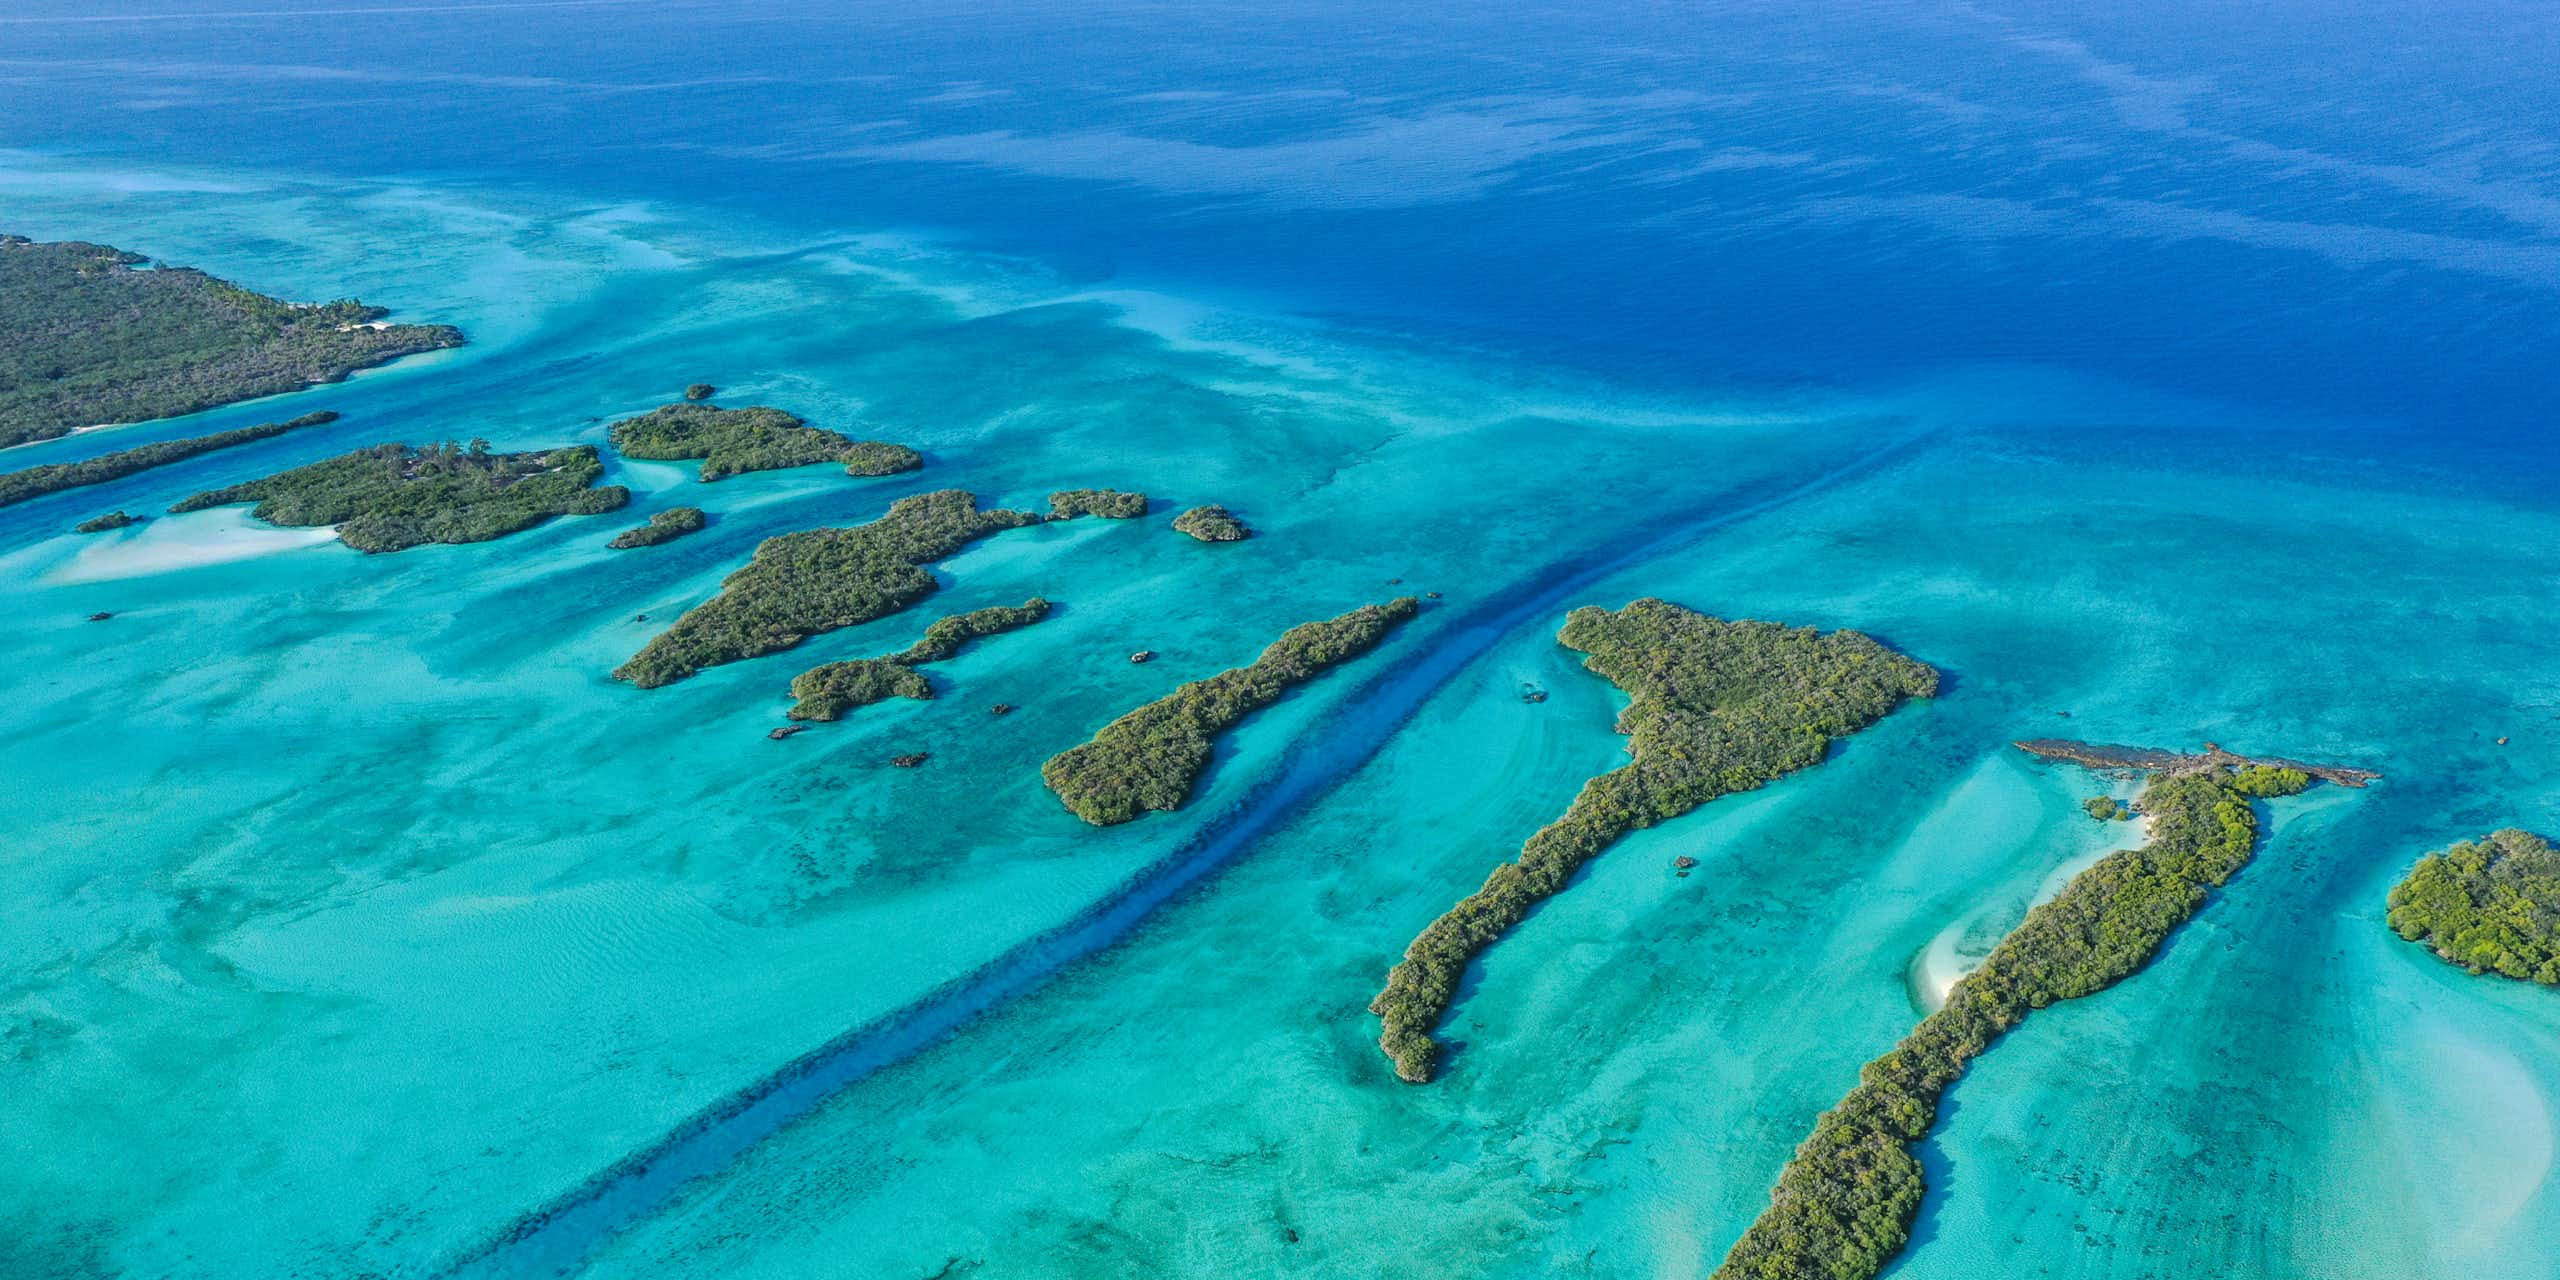 Aerial view of small islands in the ocean.